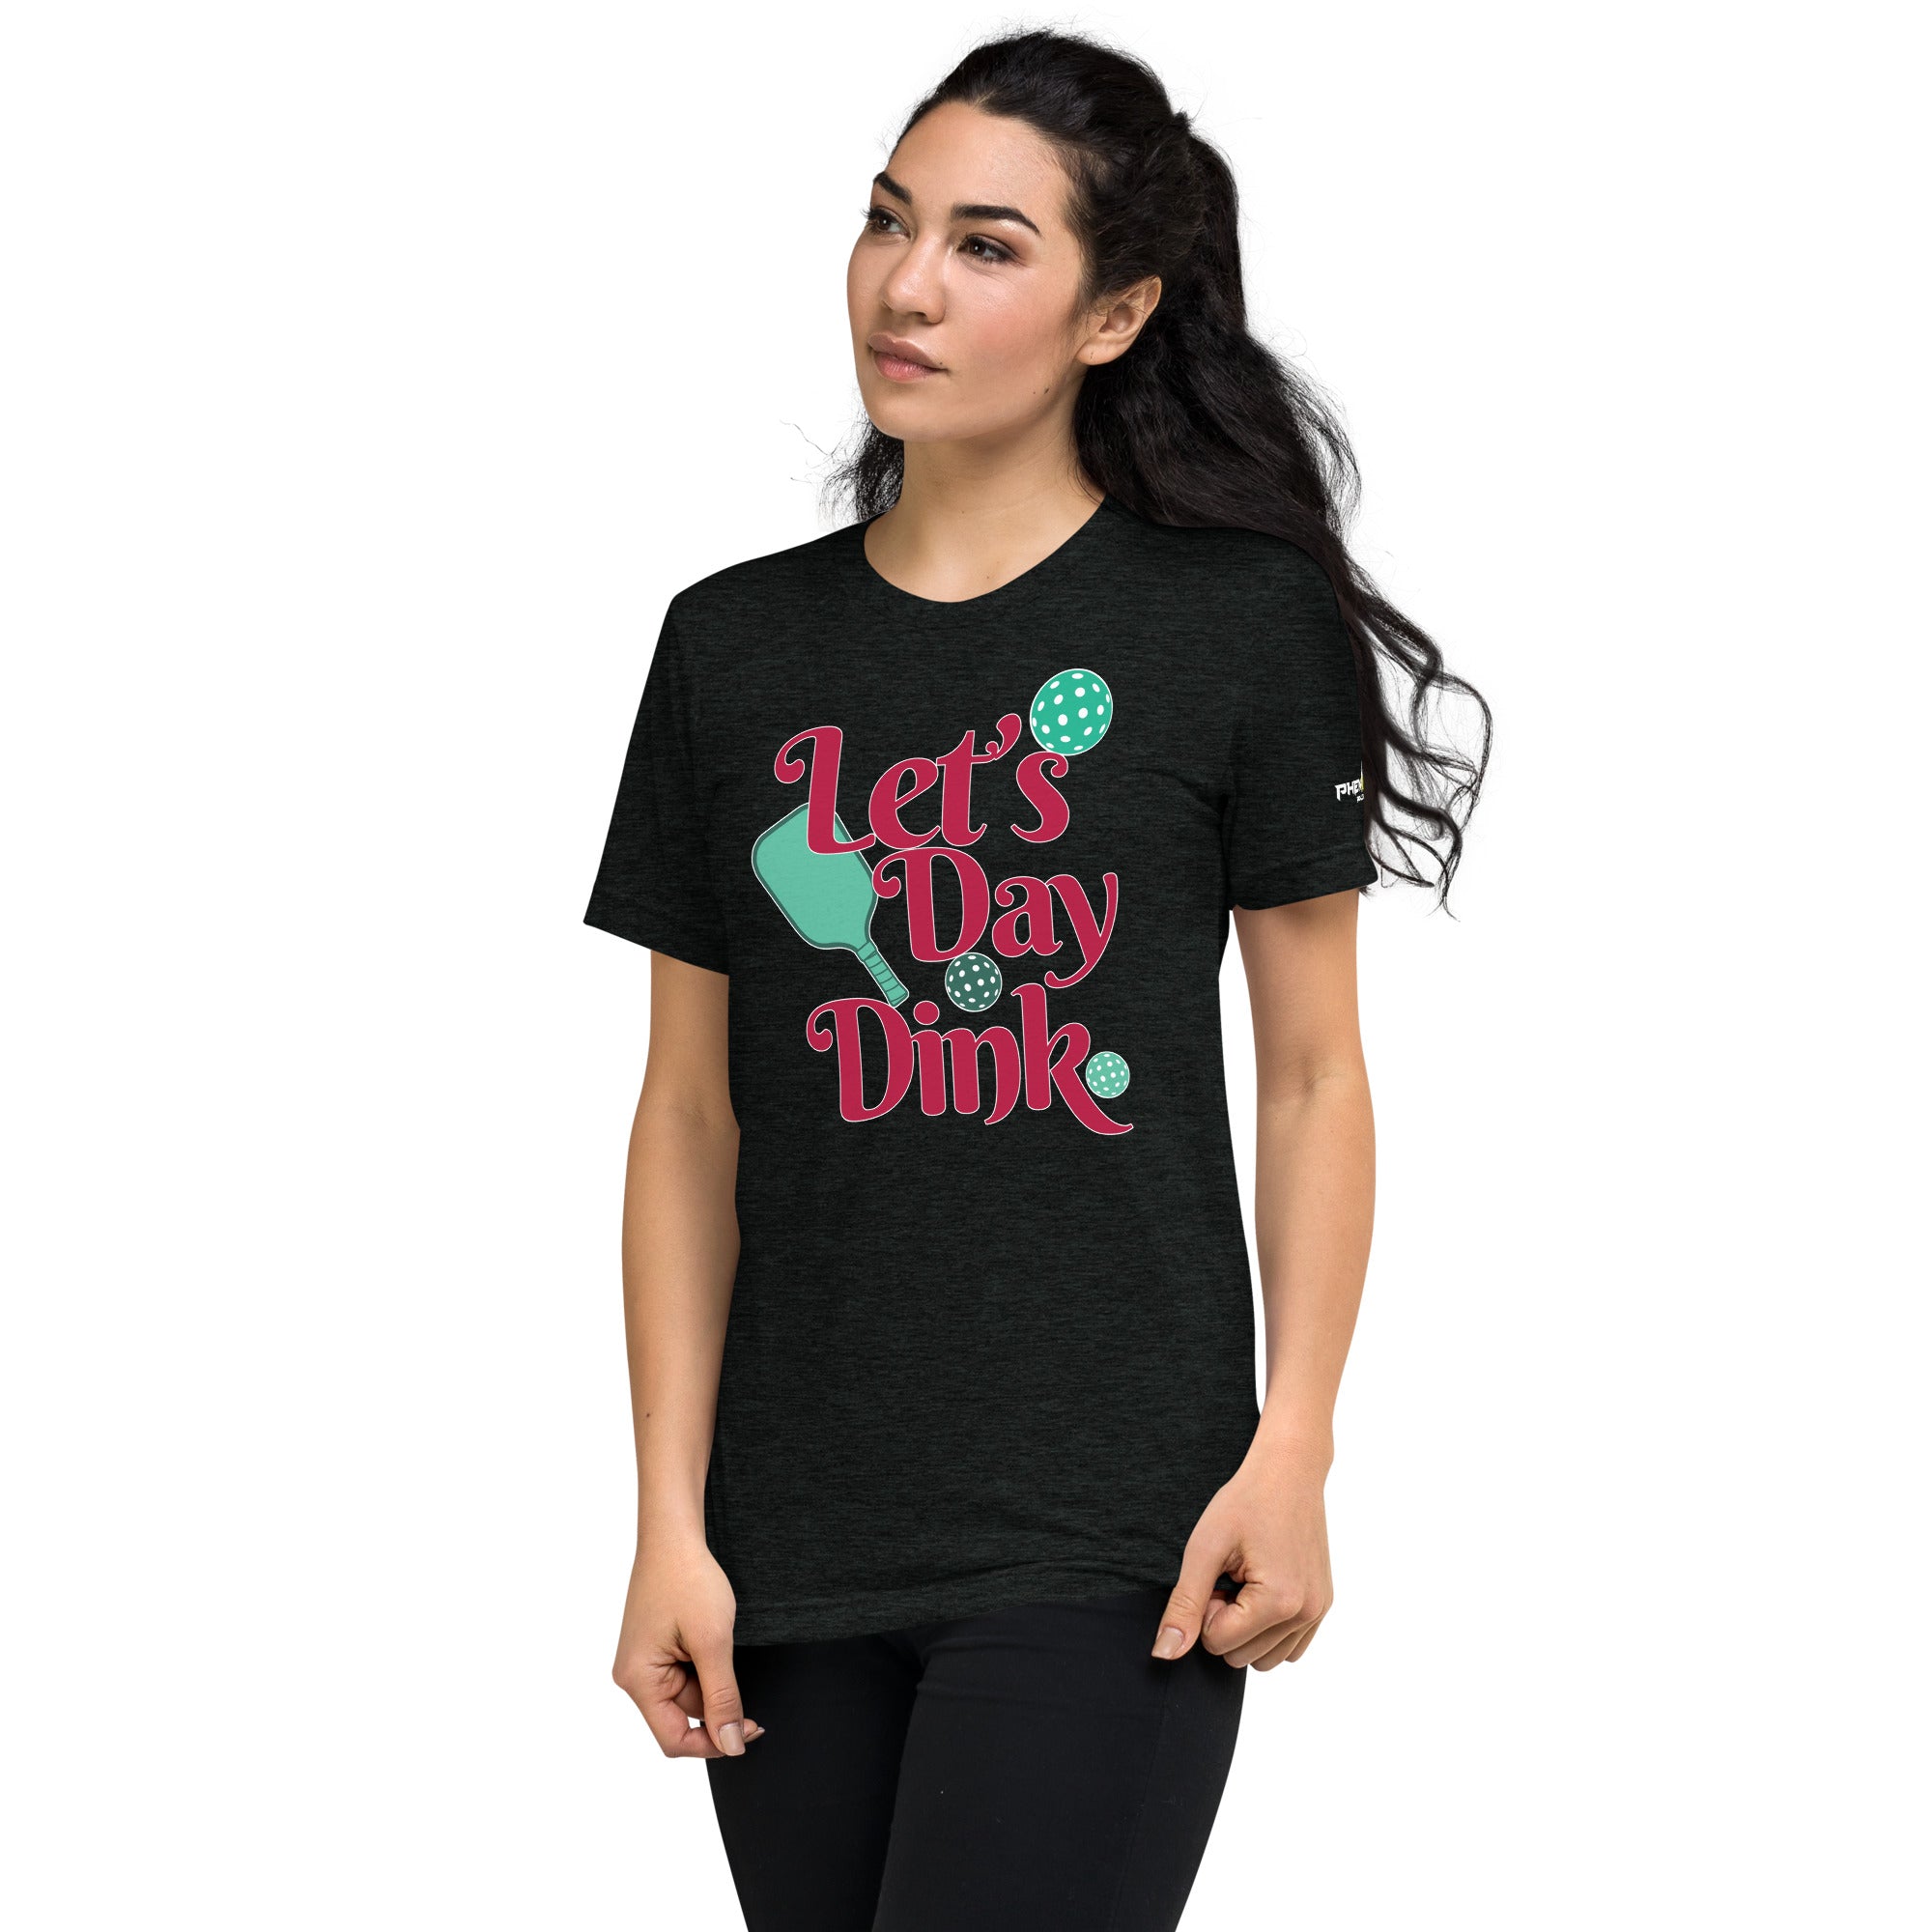 woman with long hair wearing heather charcoal let's day dink pickleball shirt performance apparel athletic top left front view